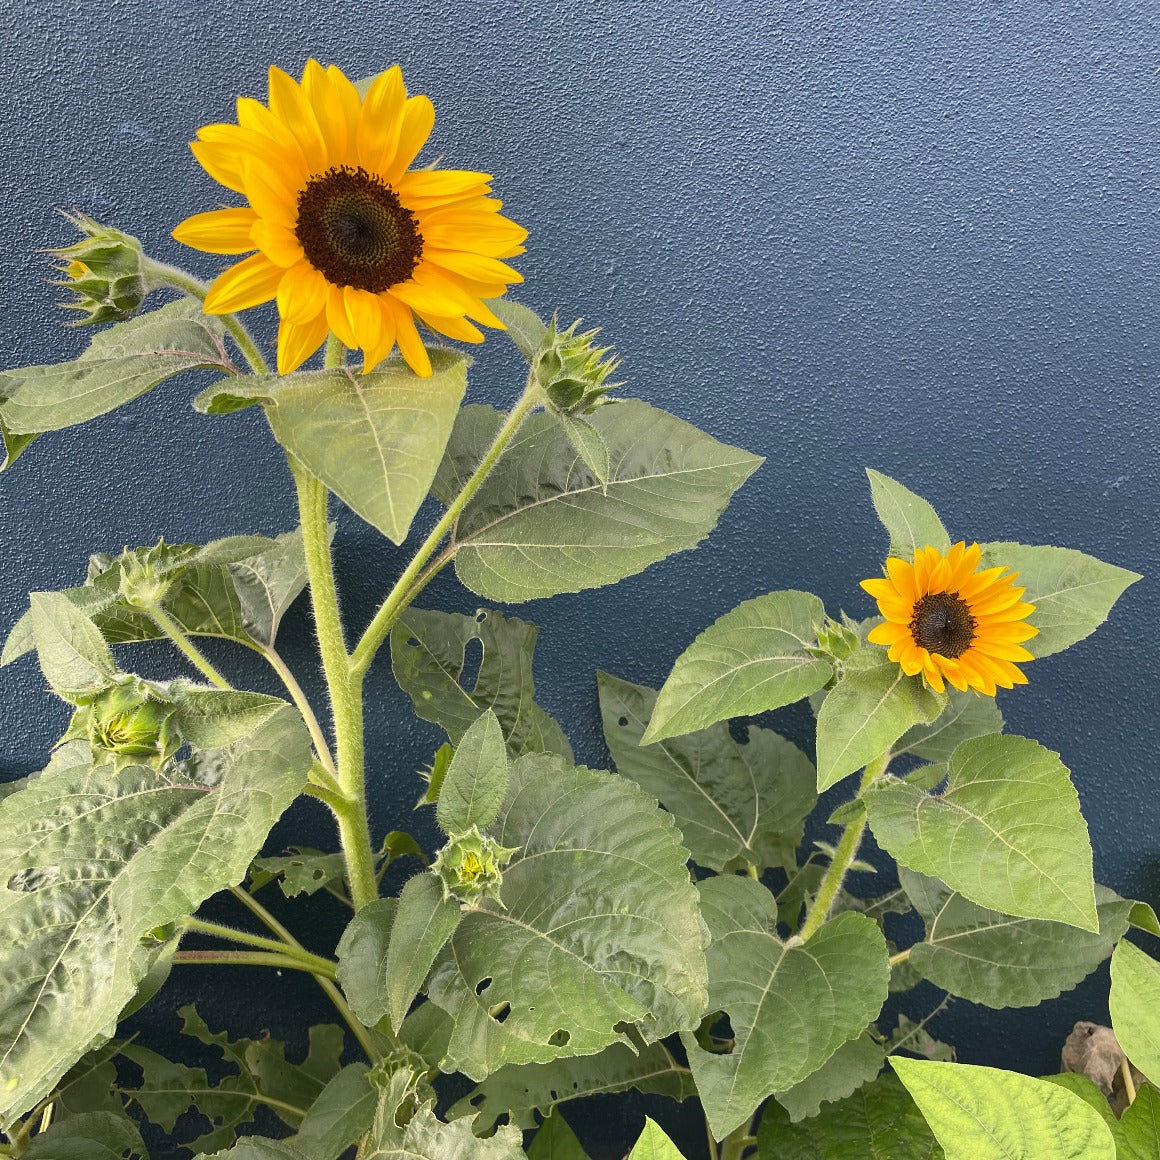 Sunflowers planted in a garden 